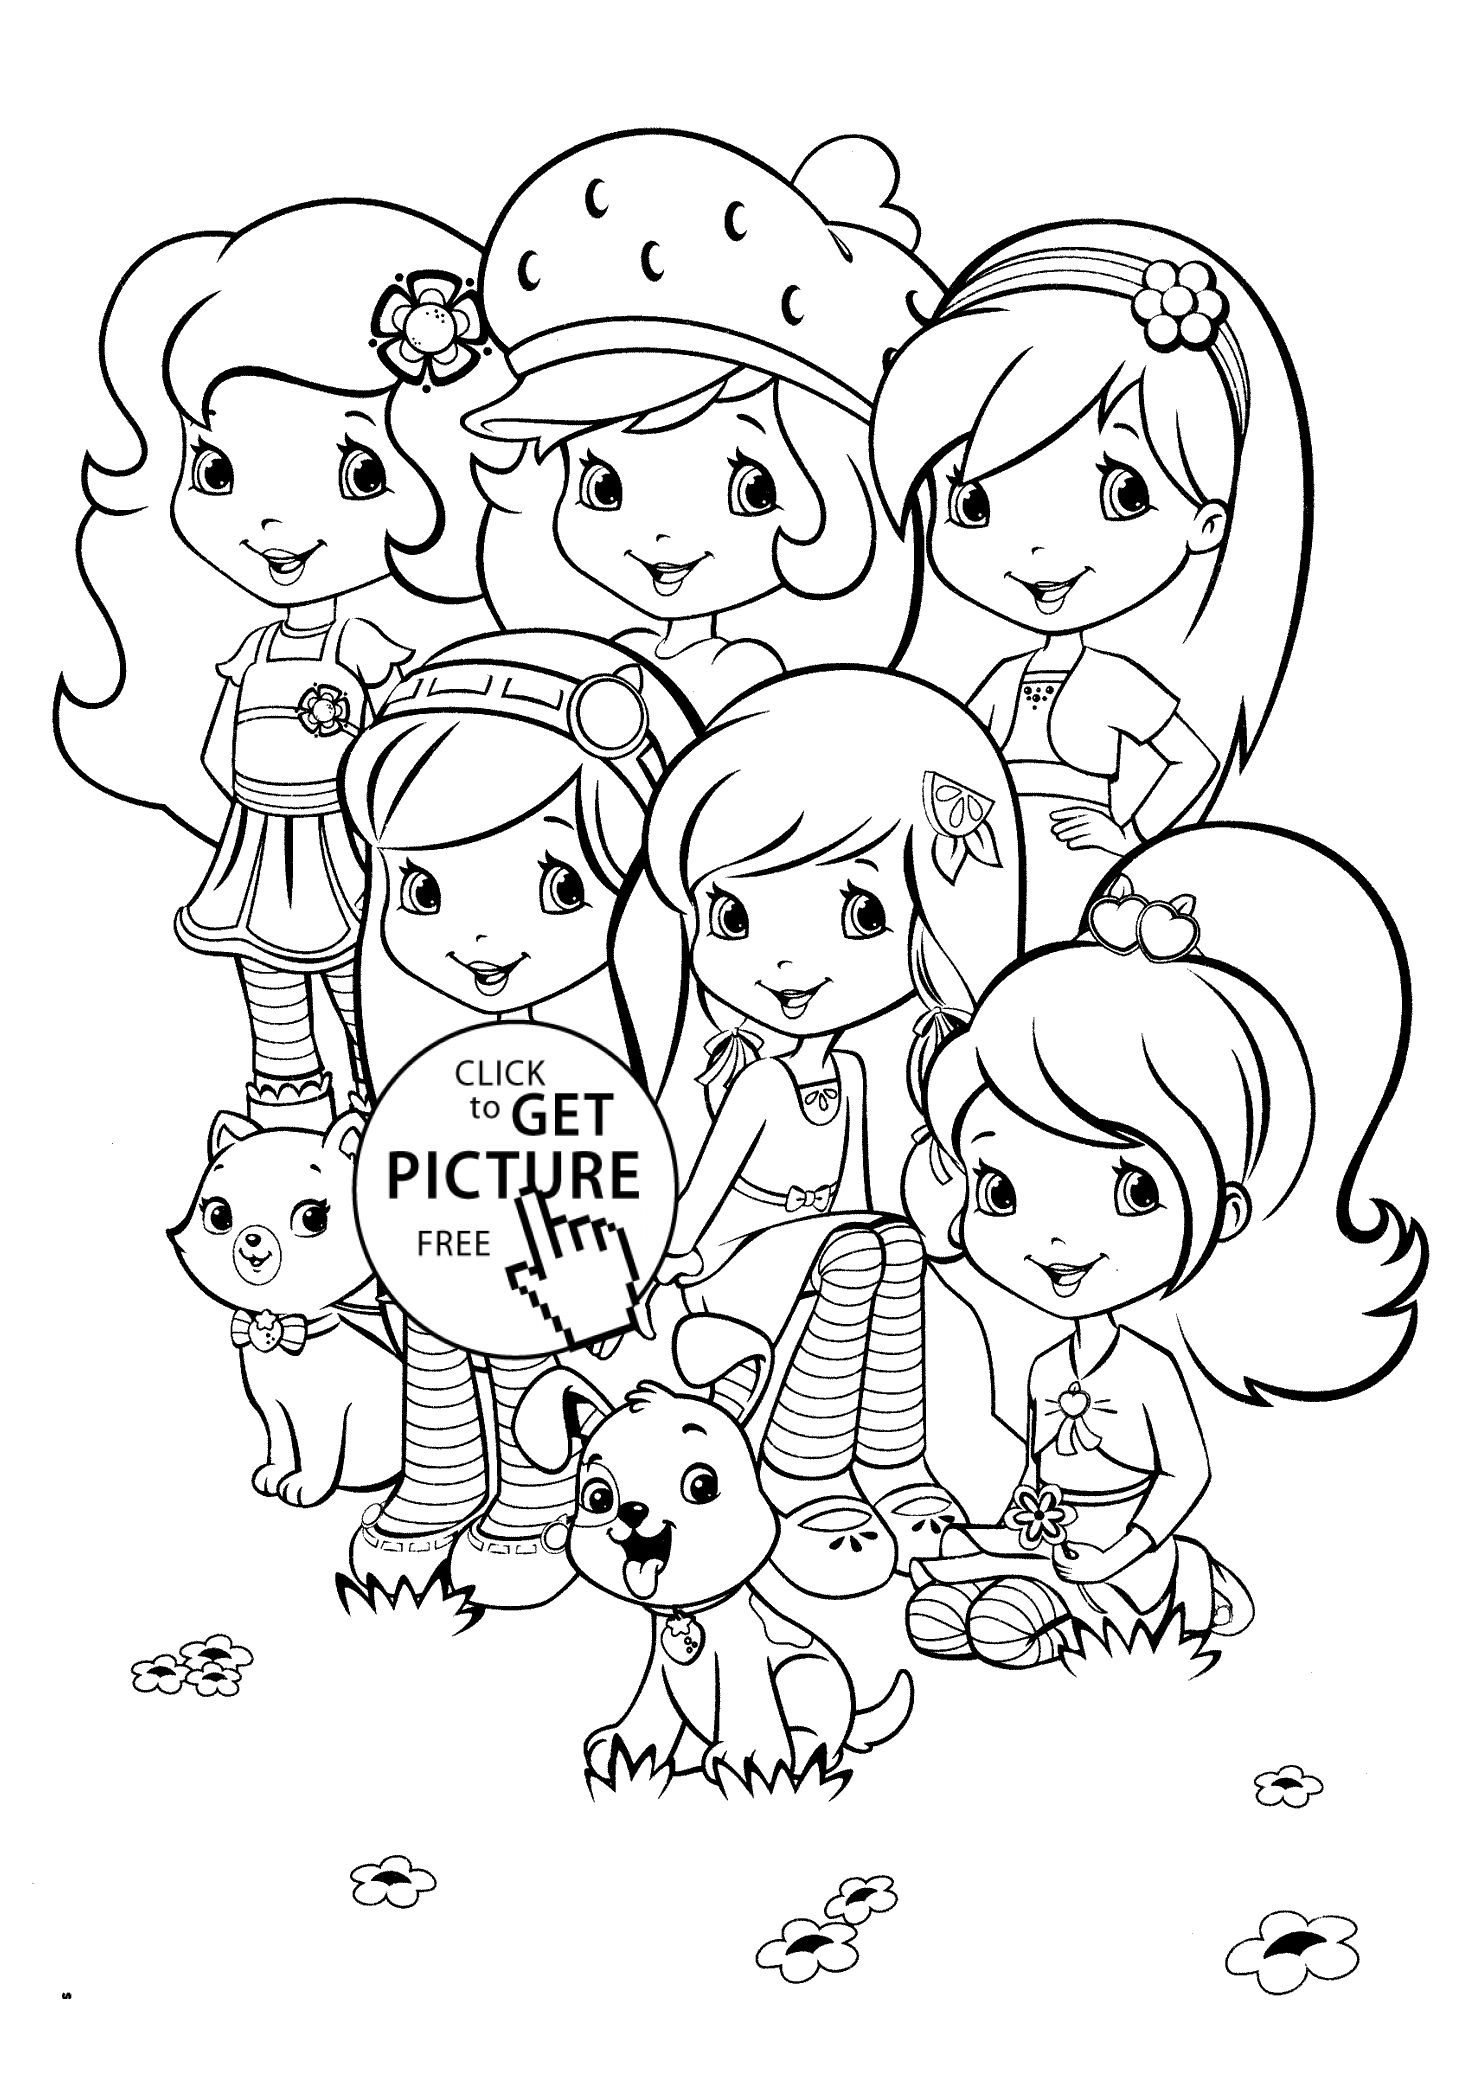 Strawberry shortcake coloring pages team strawberry shortcake coloring pages for kids printable free